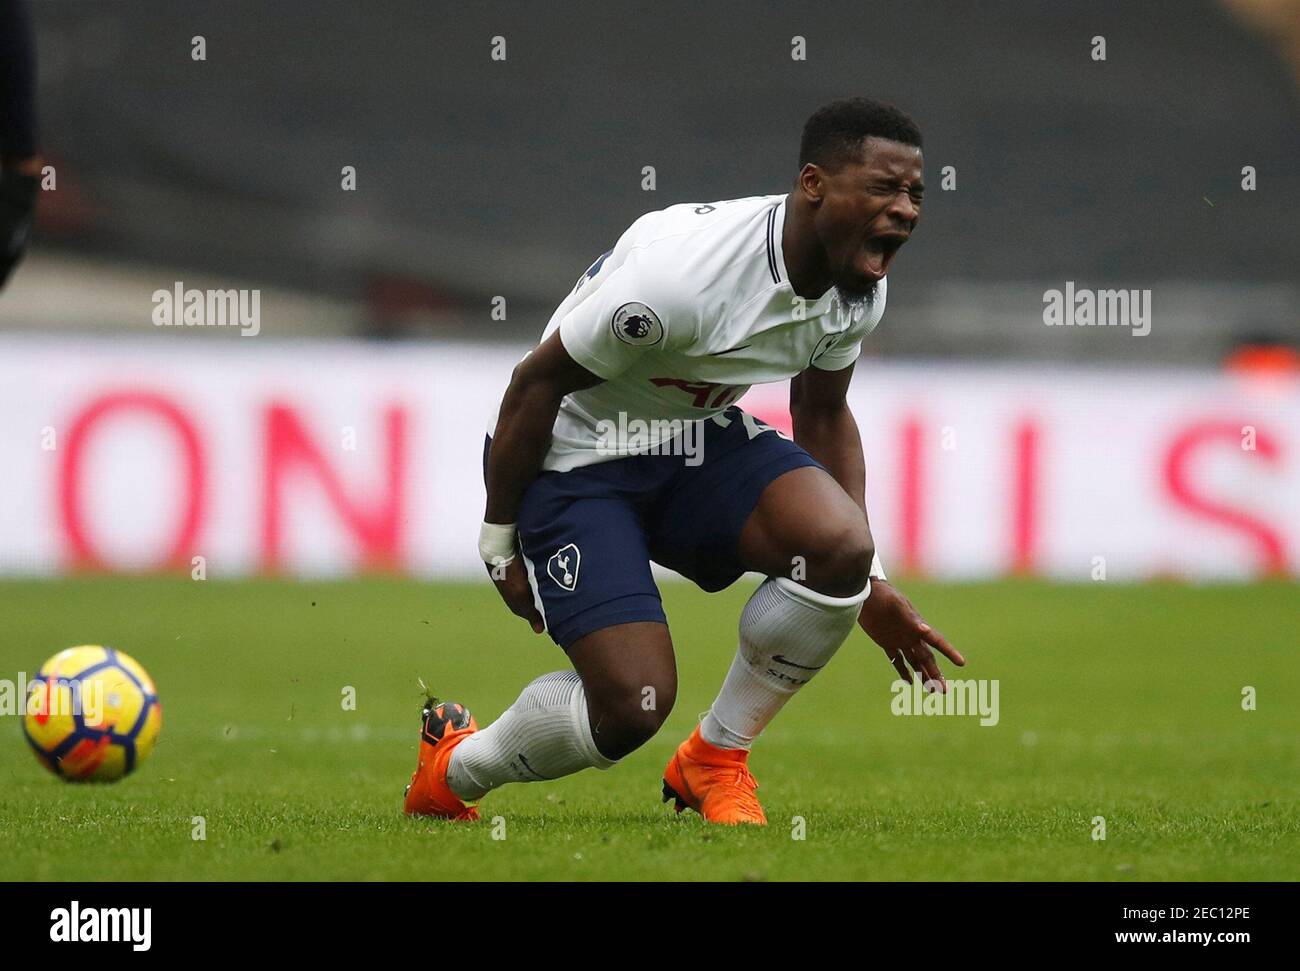 Soccer Football - Premier League - Tottenham Hotspur vs Huddersfield Town - Wembley Stadium, London, Britain - March 3, 2018   Tottenham's Serge Aurier reacts after sustaining an injury    REUTERS/Eddie Keogh    EDITORIAL USE ONLY. No use with unauthorized audio, video, data, fixture lists, club/league logos or 'live' services. Online in-match use limited to 75 images, no video emulation. No use in betting, games or single club/league/player publications.  Please contact your account representative for further details. Stock Photo